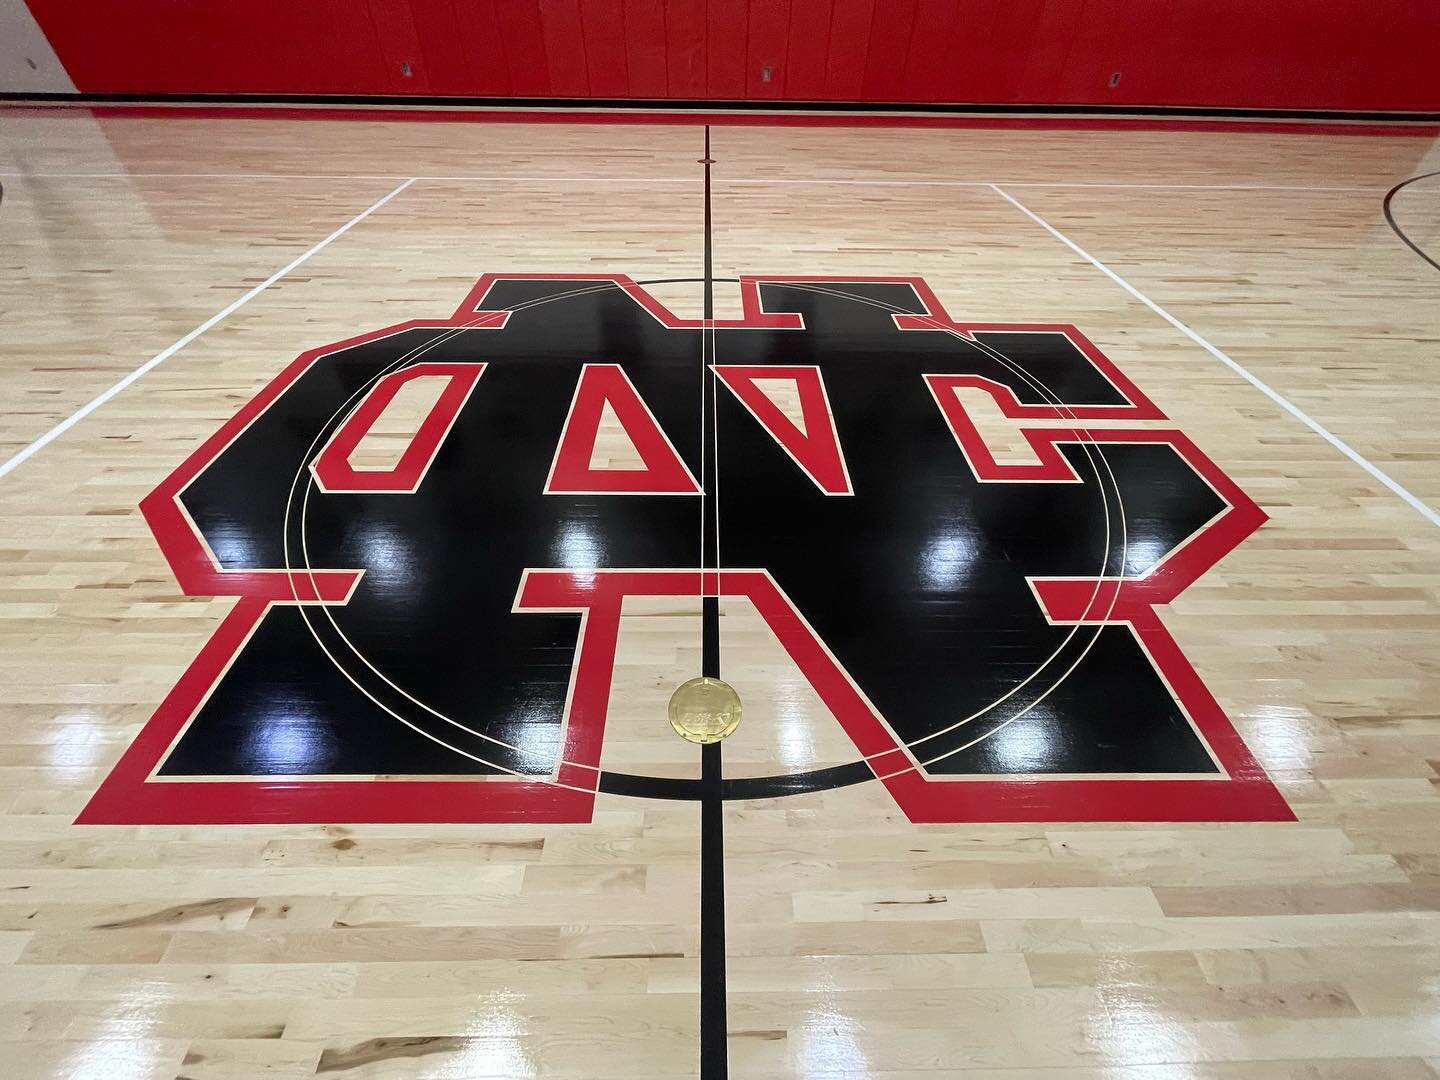 Red Hurricanes coming through! 🌪️
New install at New Castle high school&rsquo;s auxiliary gym! 
#woodflooring #gymflooring #gymnasium #newcastle #poloplaz #sherwinwilliams